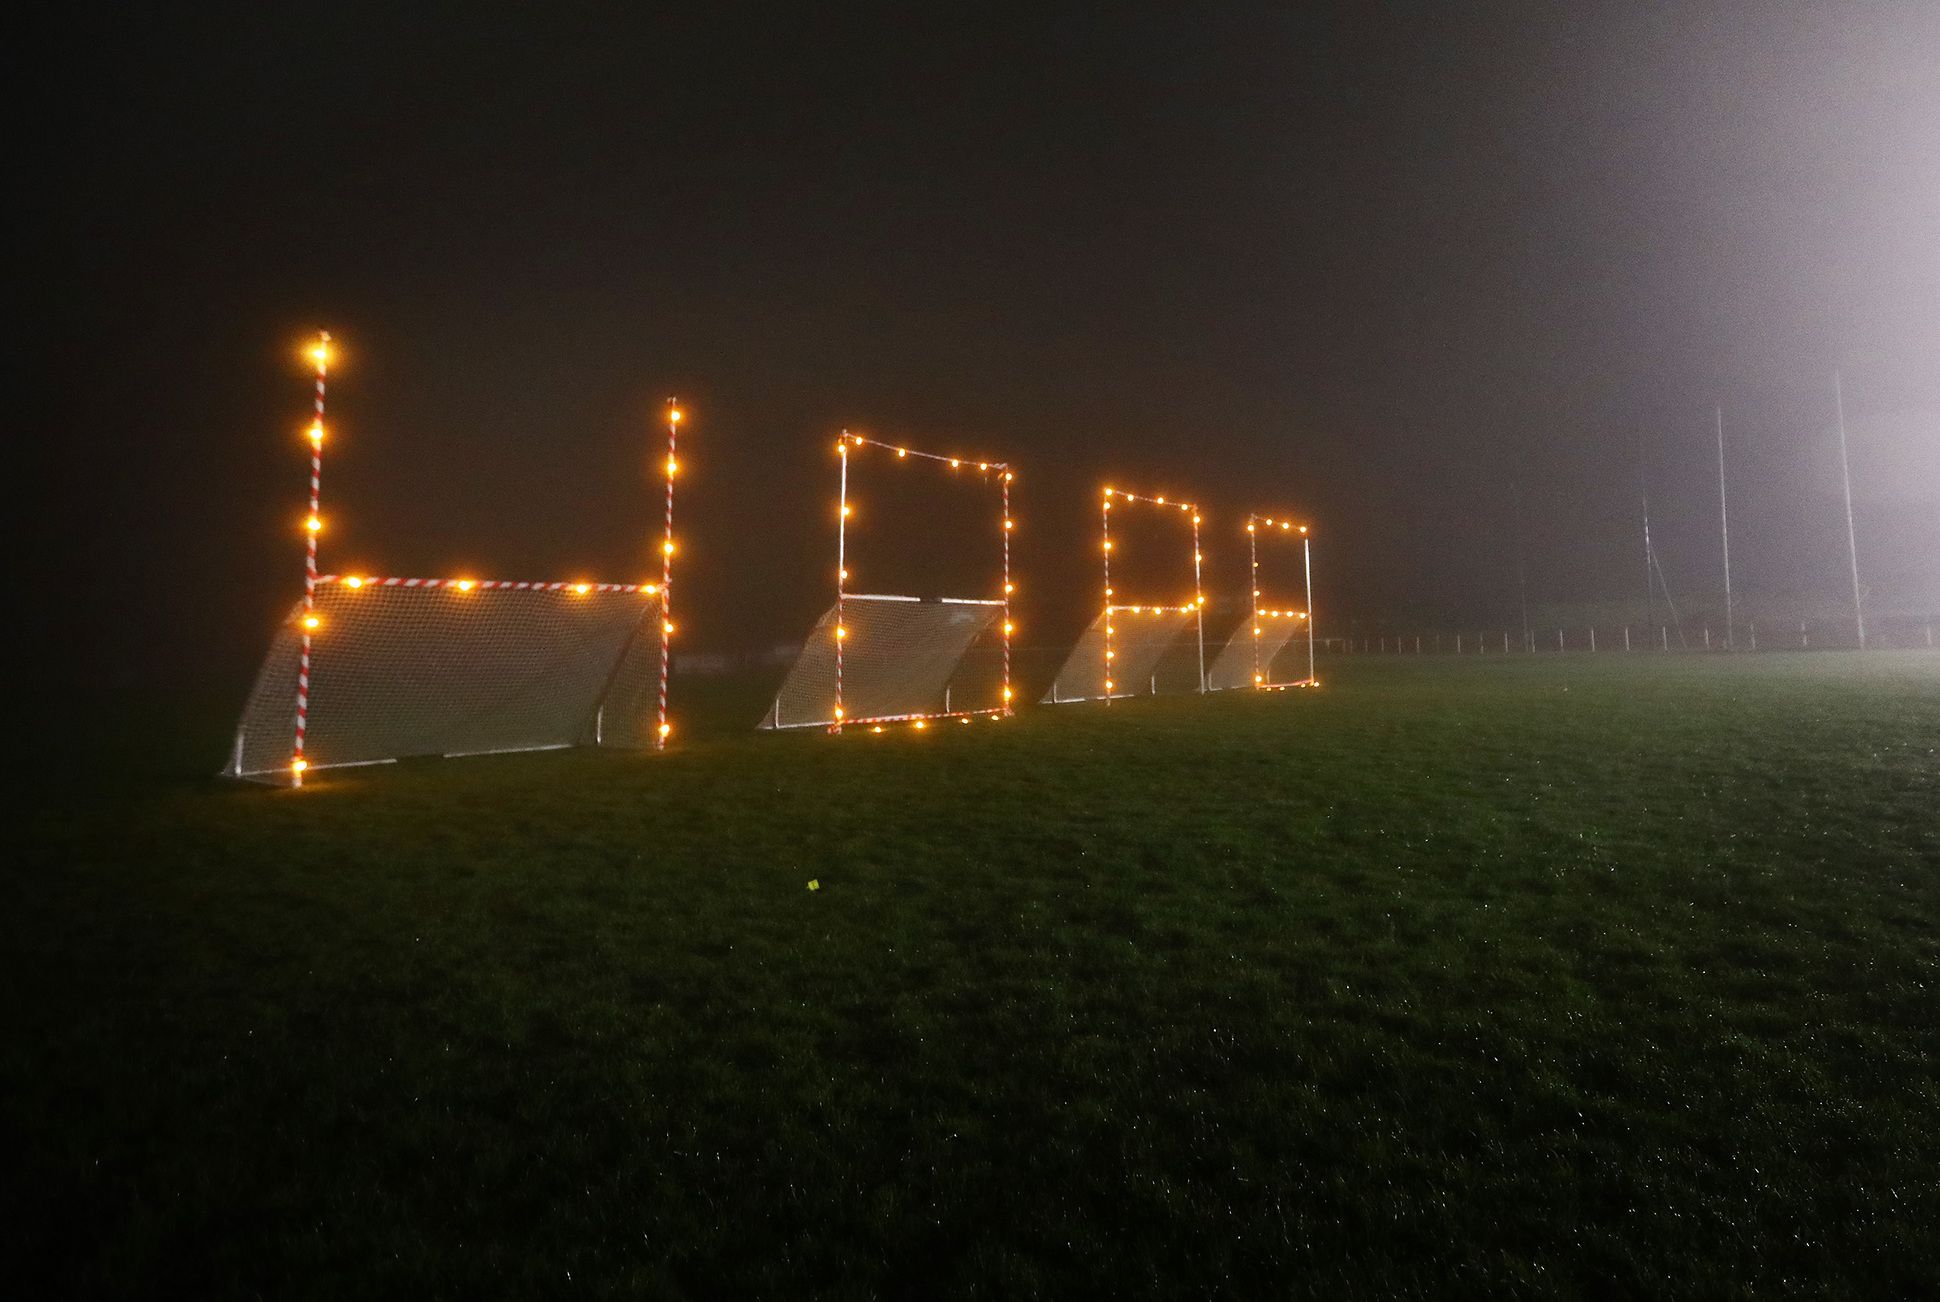 HOPE: The Hope sign lit up the way